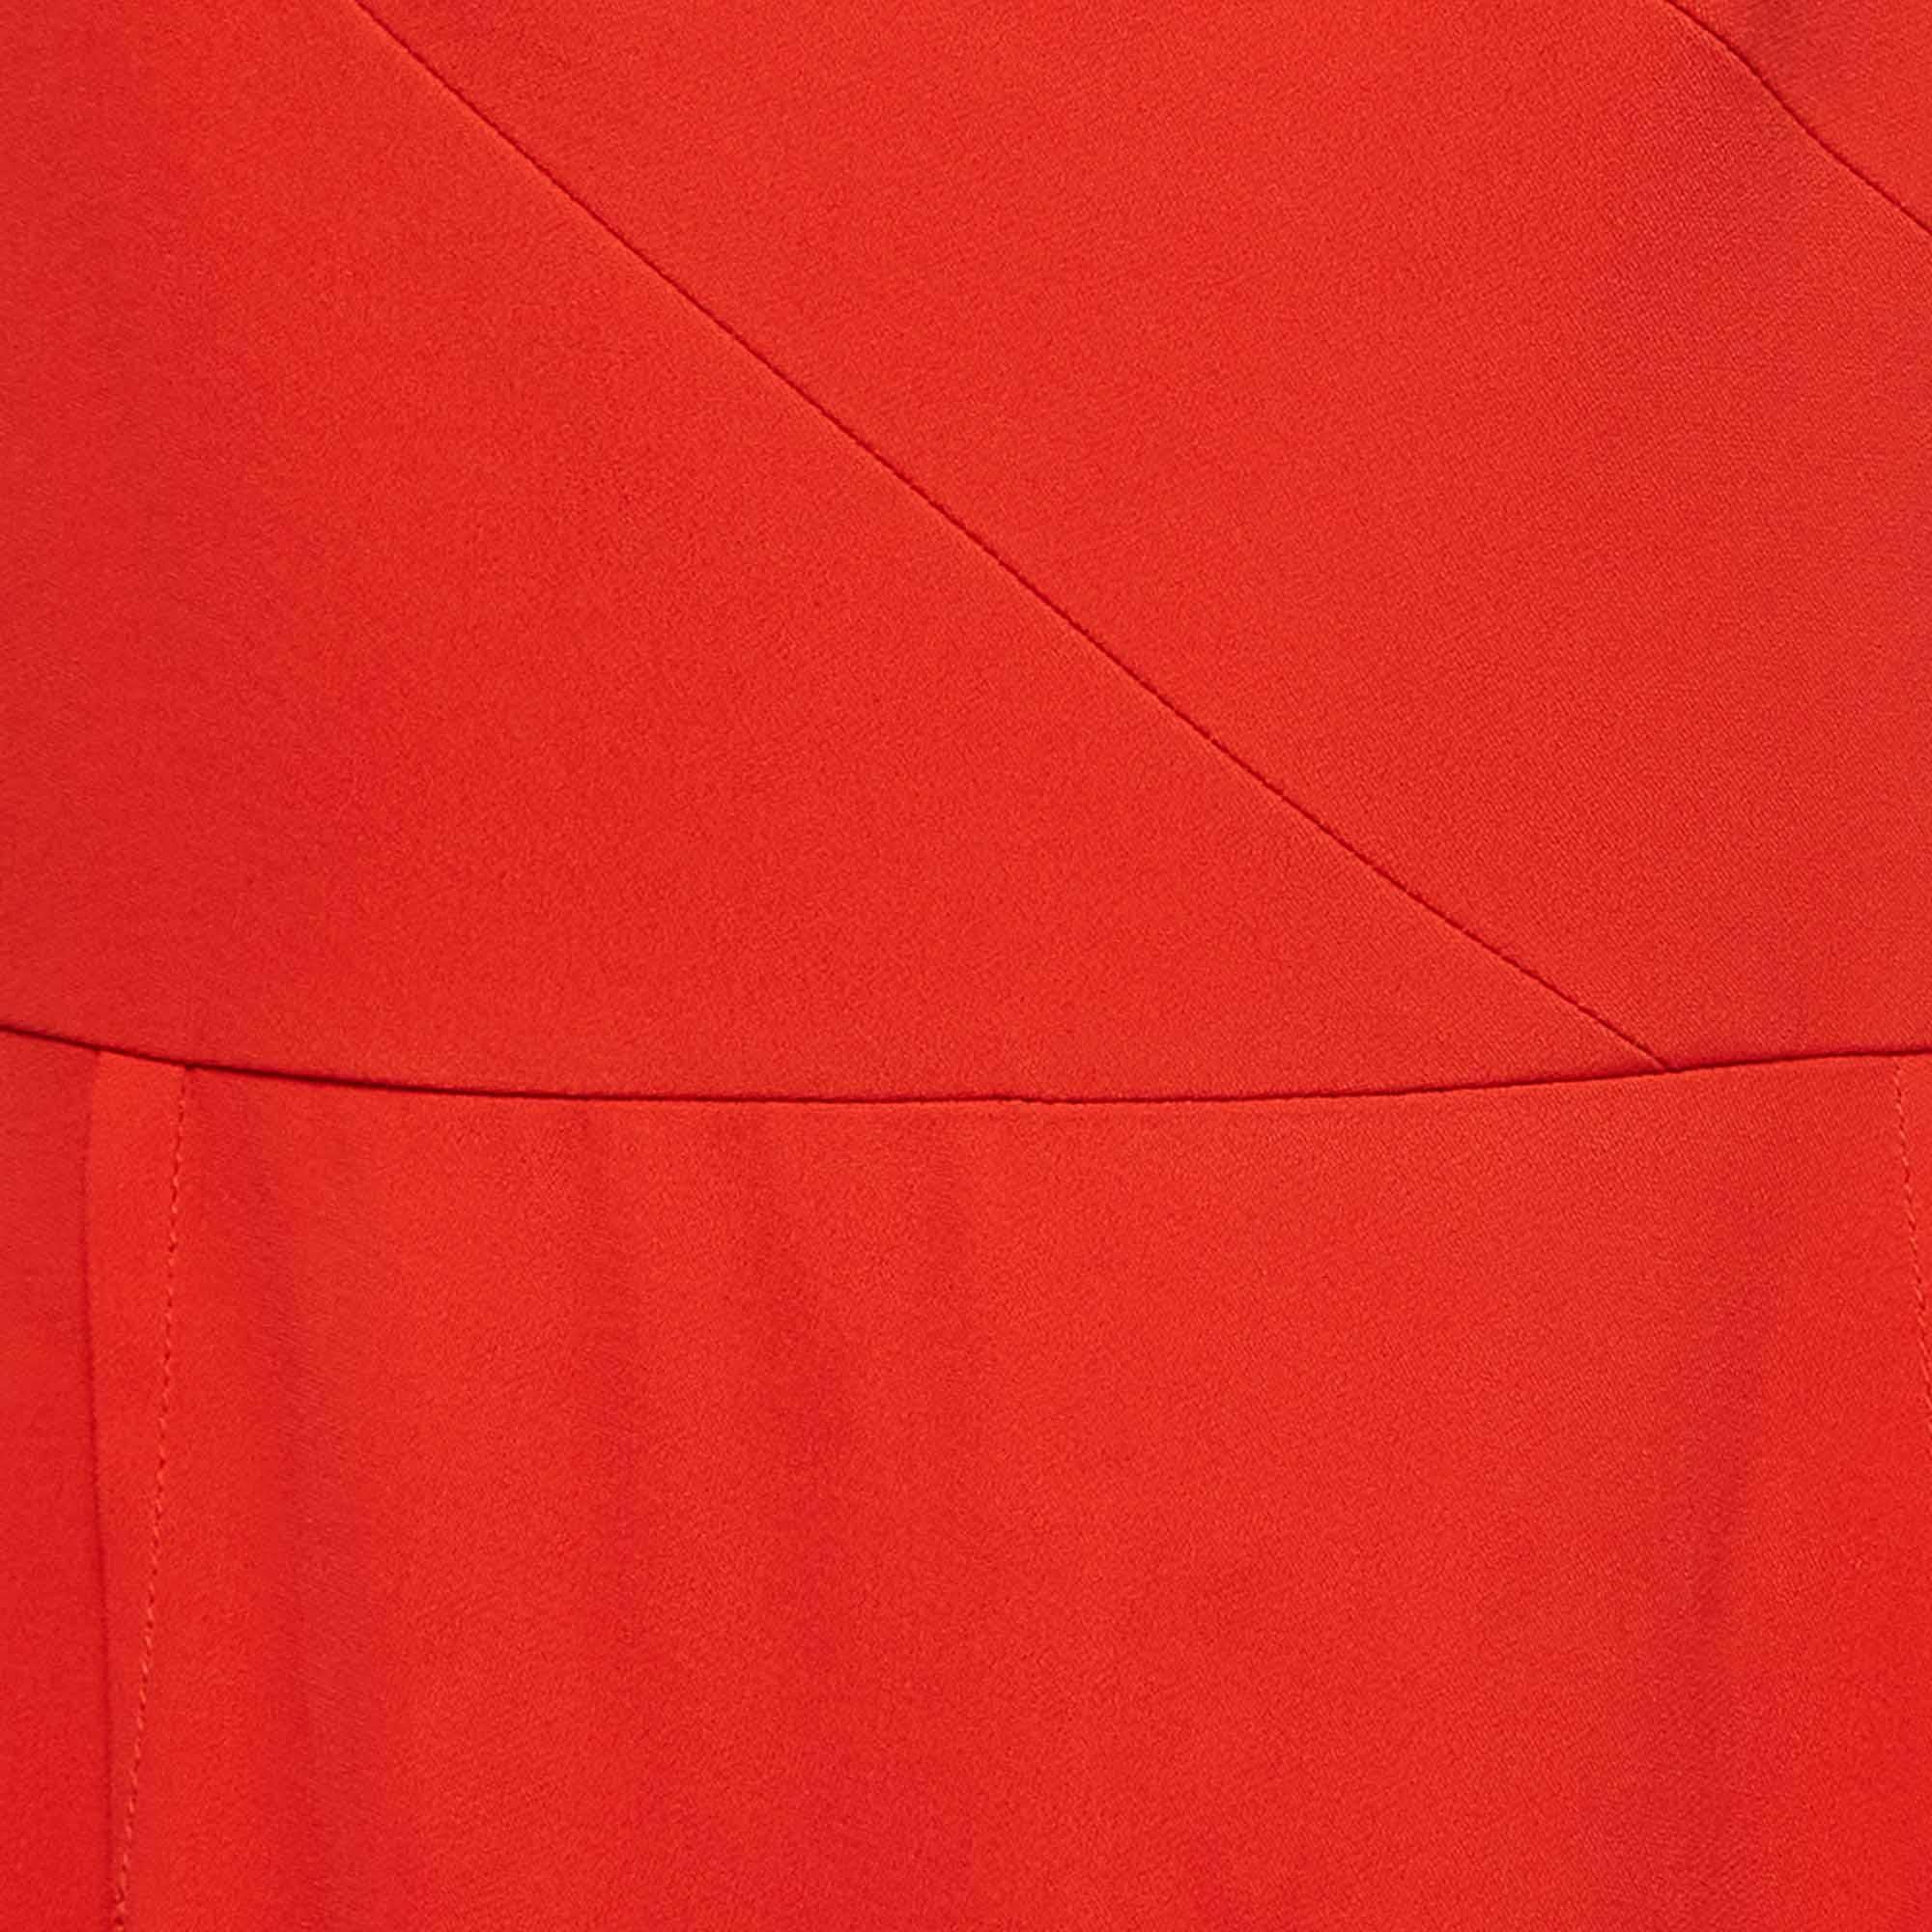 Limited Edition by Roland Mouret Bright Red Stretch Crepe Erskin Dress L In Good Condition For Sale In Dubai, Al Qouz 2